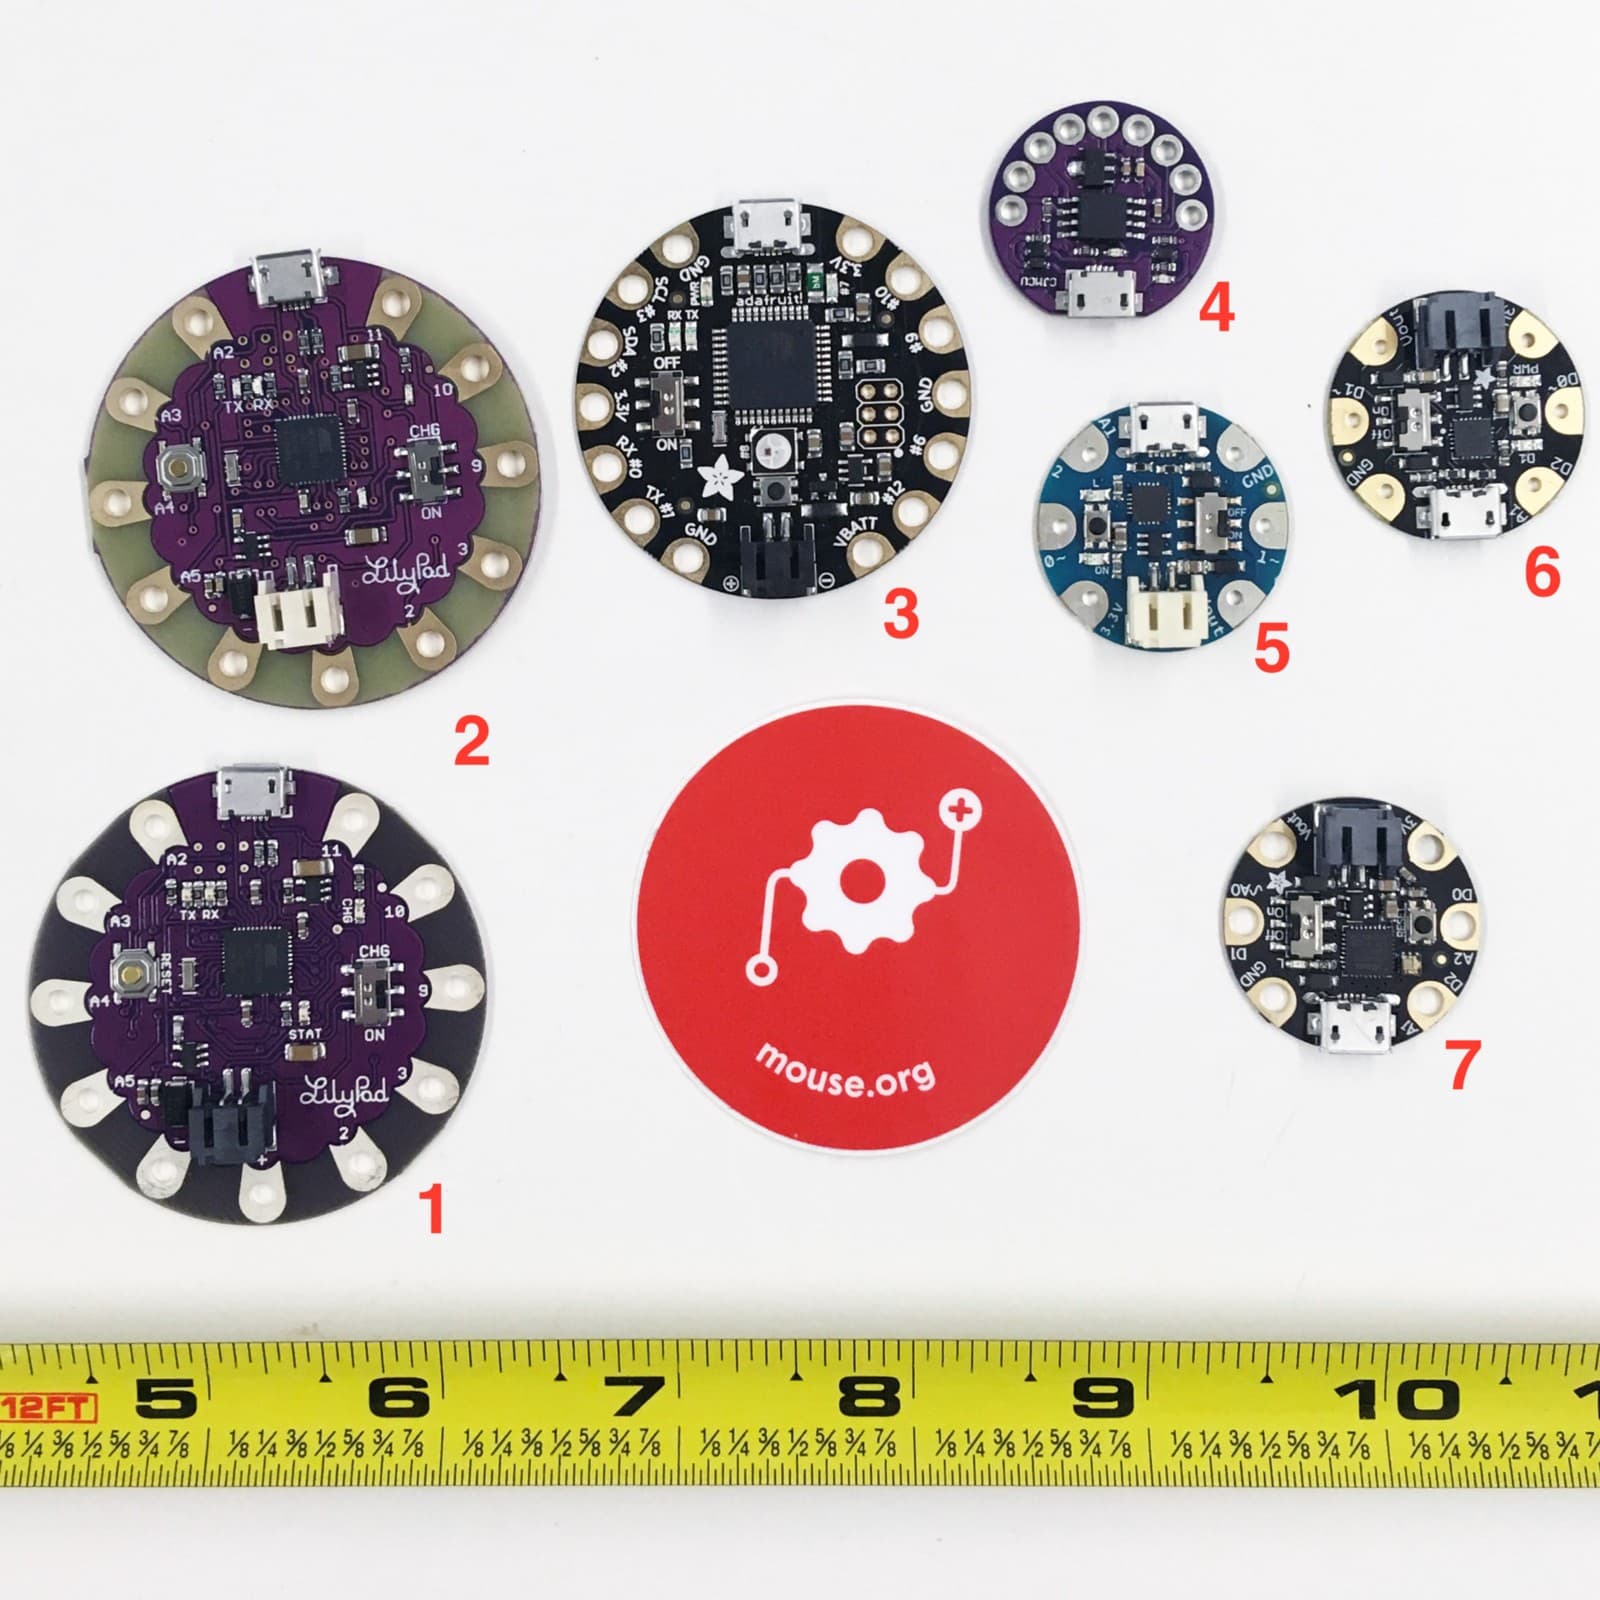 A photo of the 7 microcontrollers